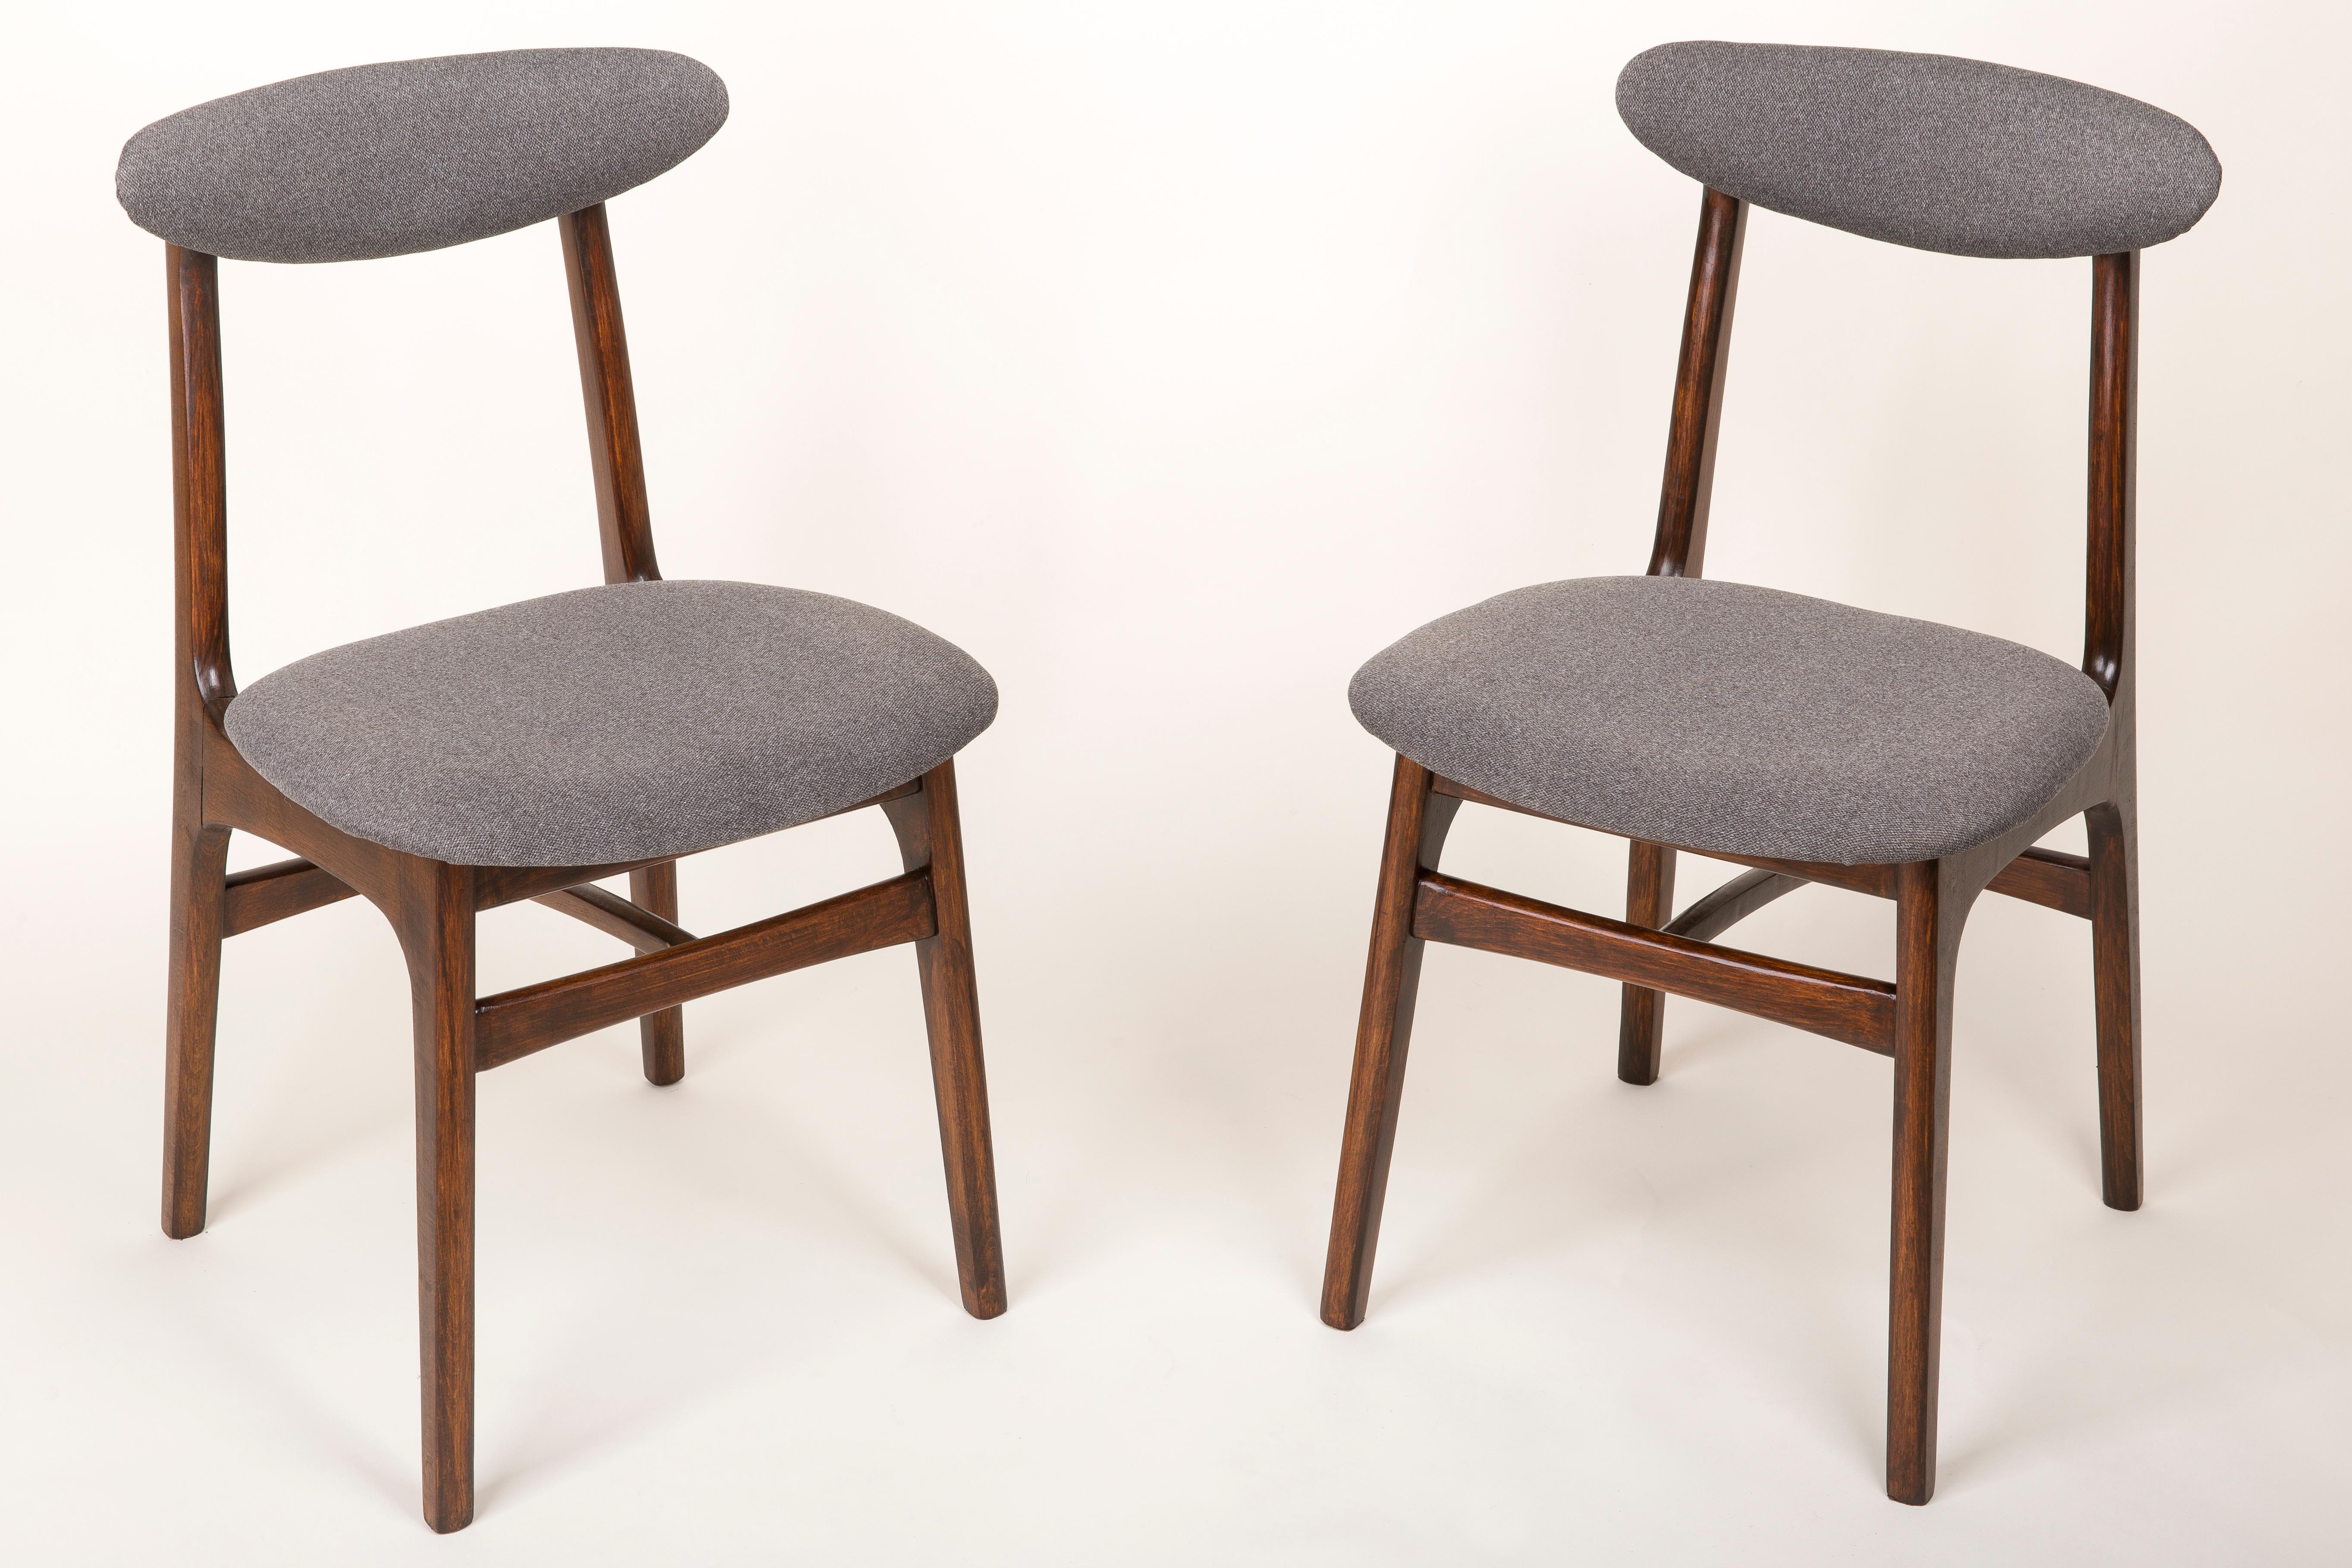 Chairs designed by prof. Rajmund Halas. They have been made of beechwood. They have undergone a complete upholstery renovation, the woodwork has been refreshed. Seats and backs were dressed in a grey, durable and pleasant to the touch fabric. They